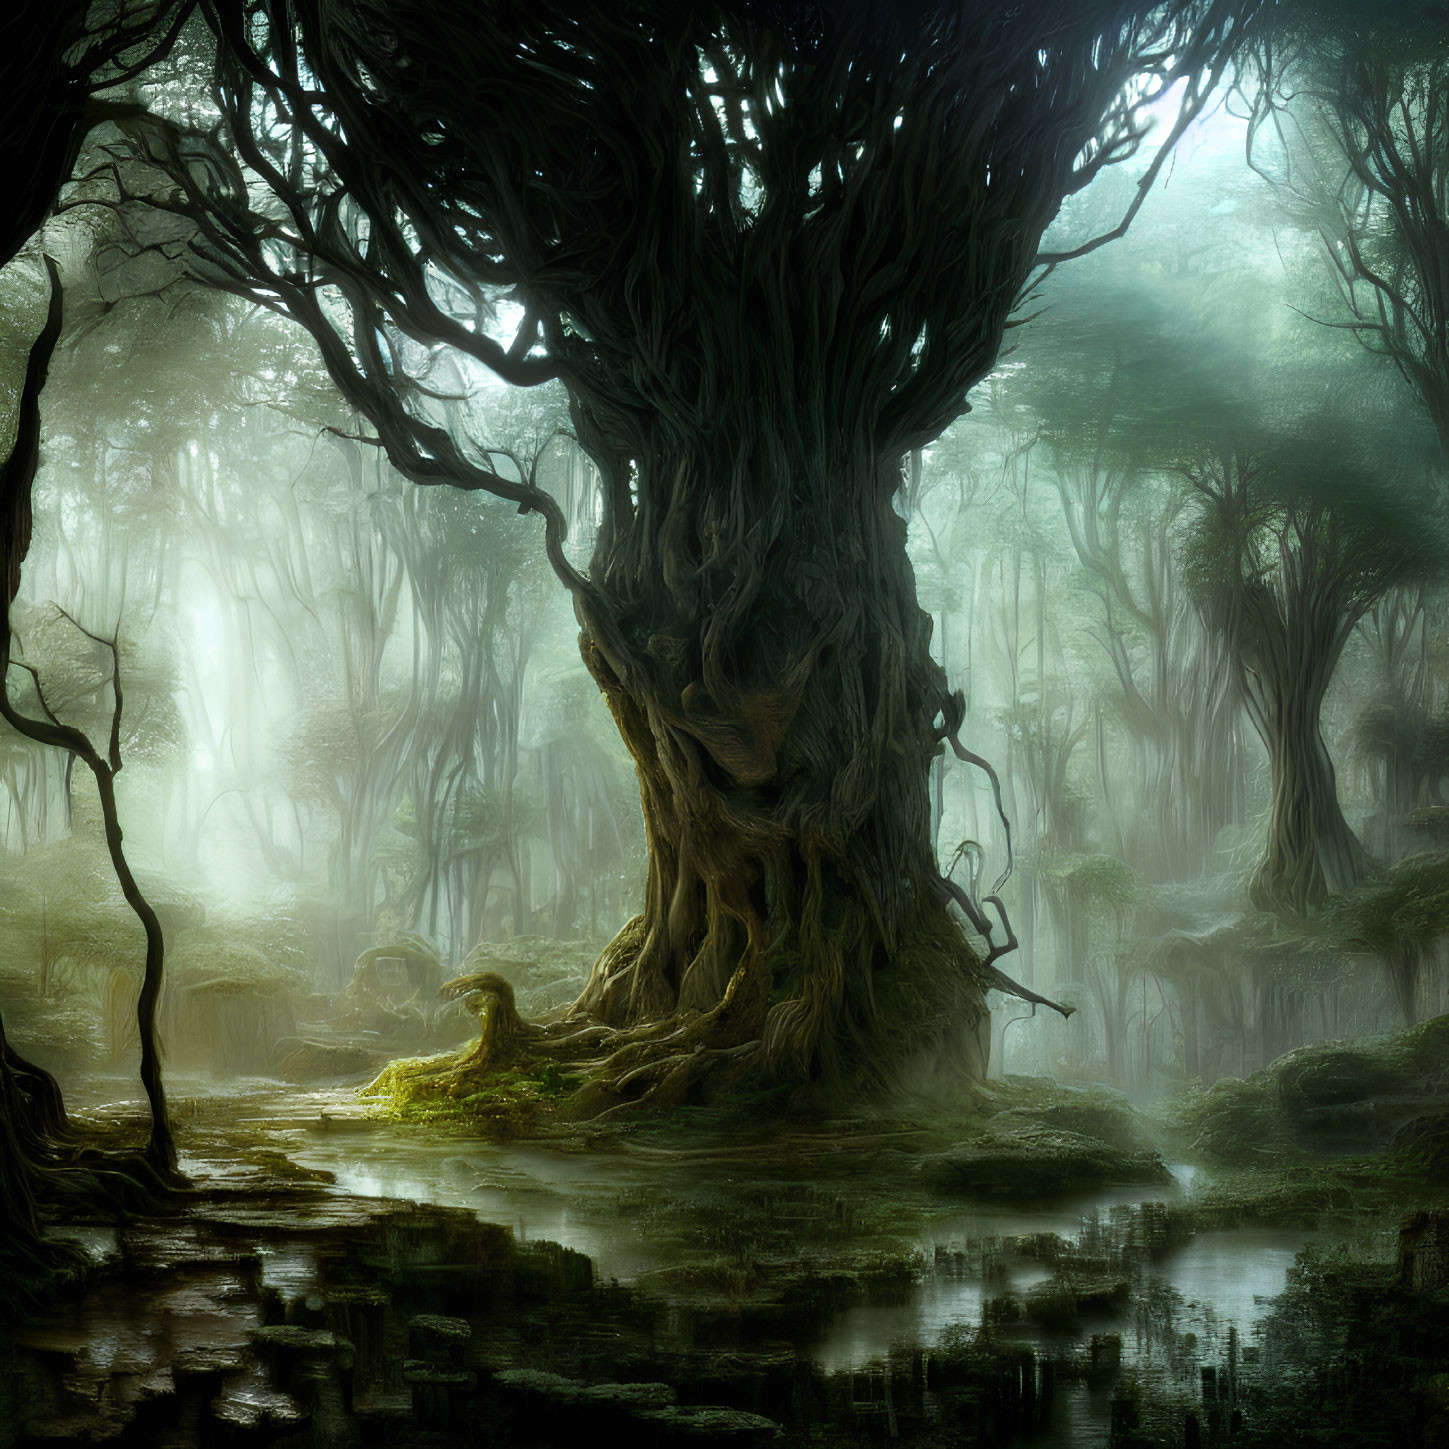 Mystical forest scene with ancient tree and misty ambiance